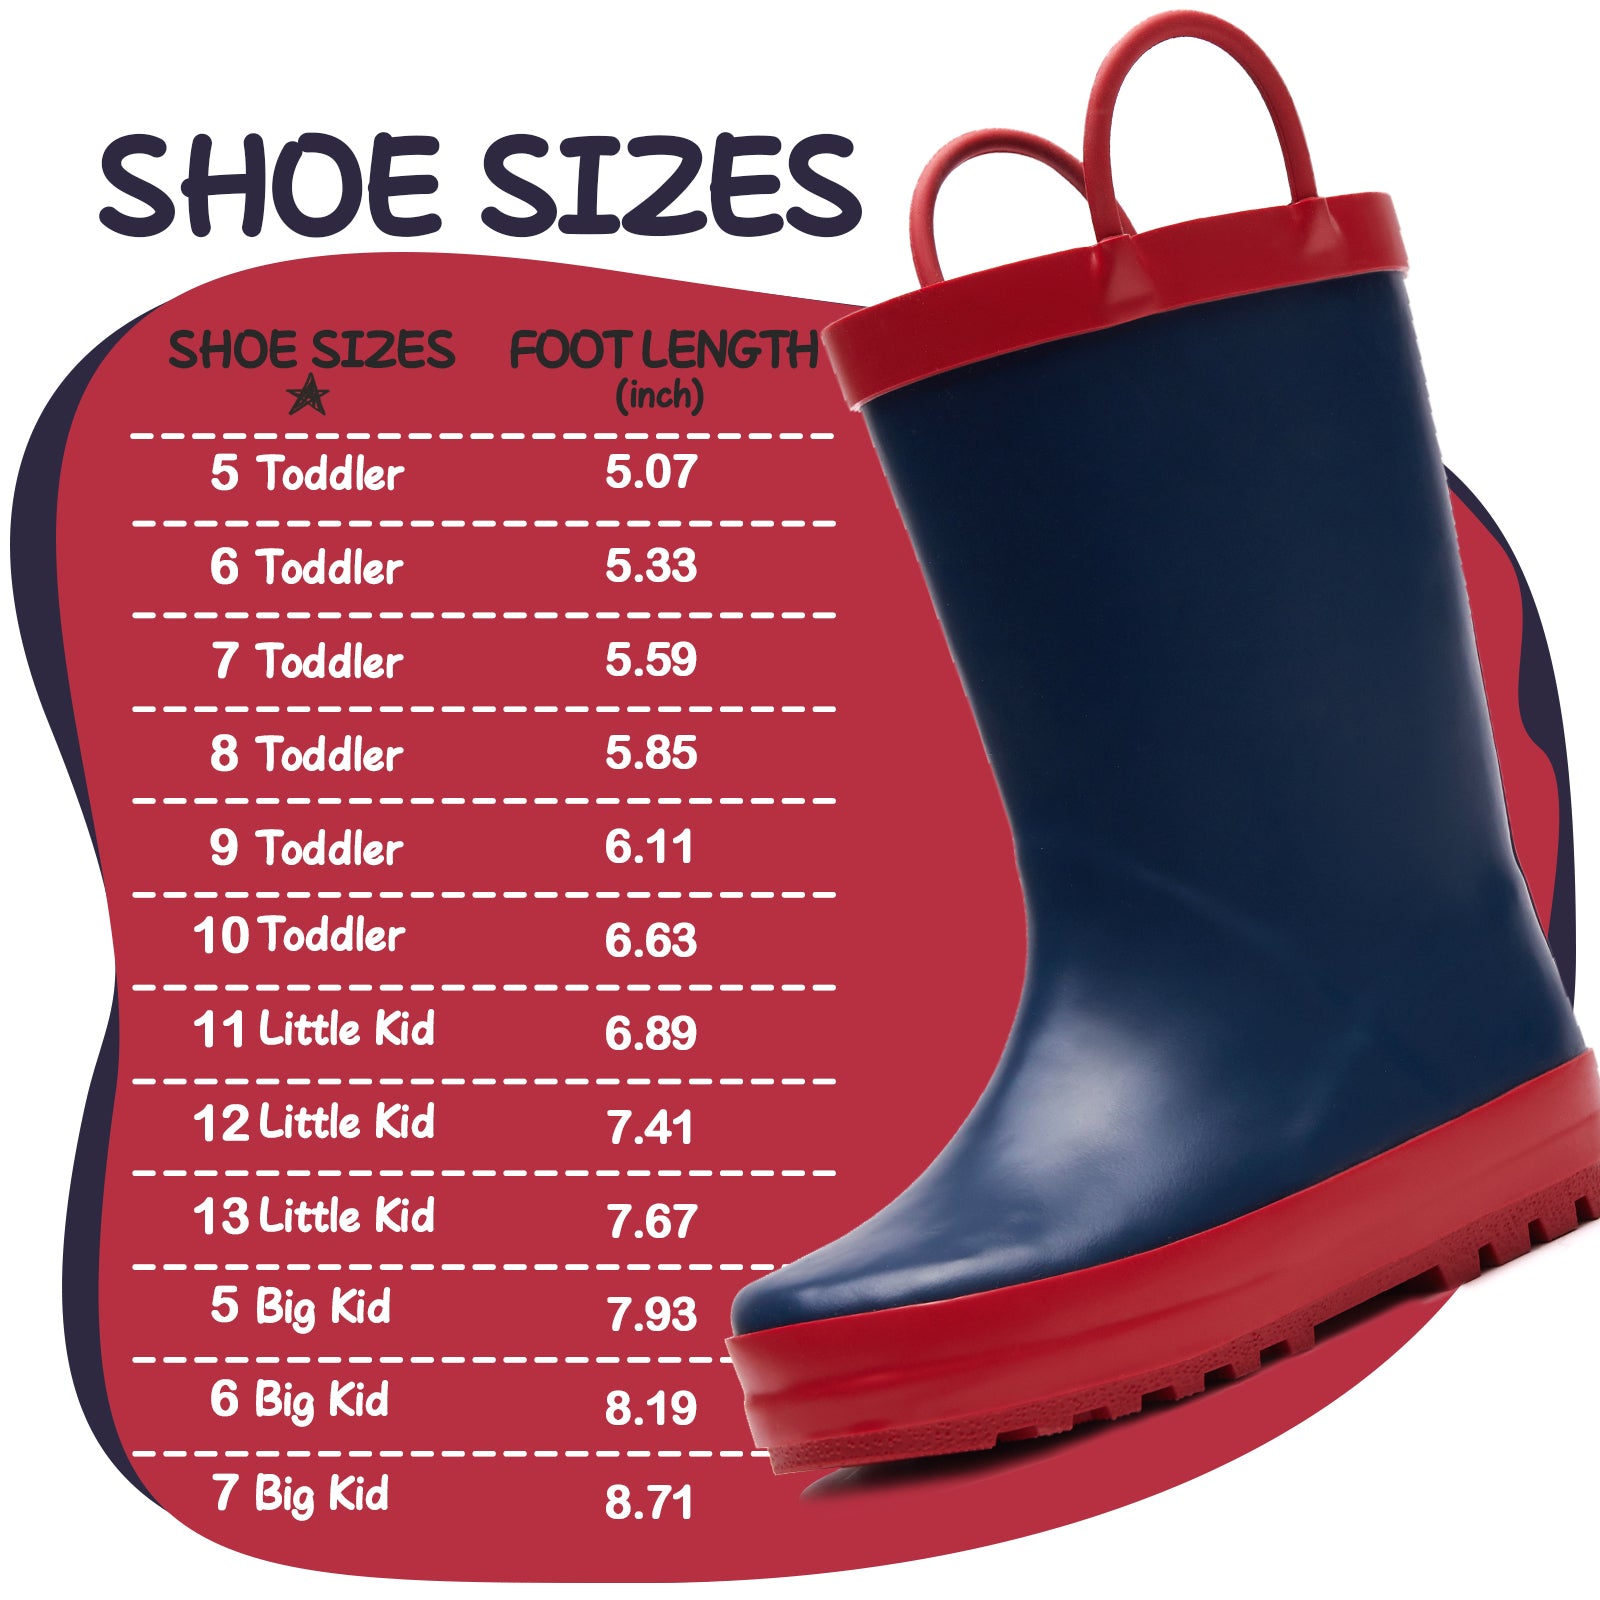 Navy Rubber Rain Boots with Red Handles - MYSOFT